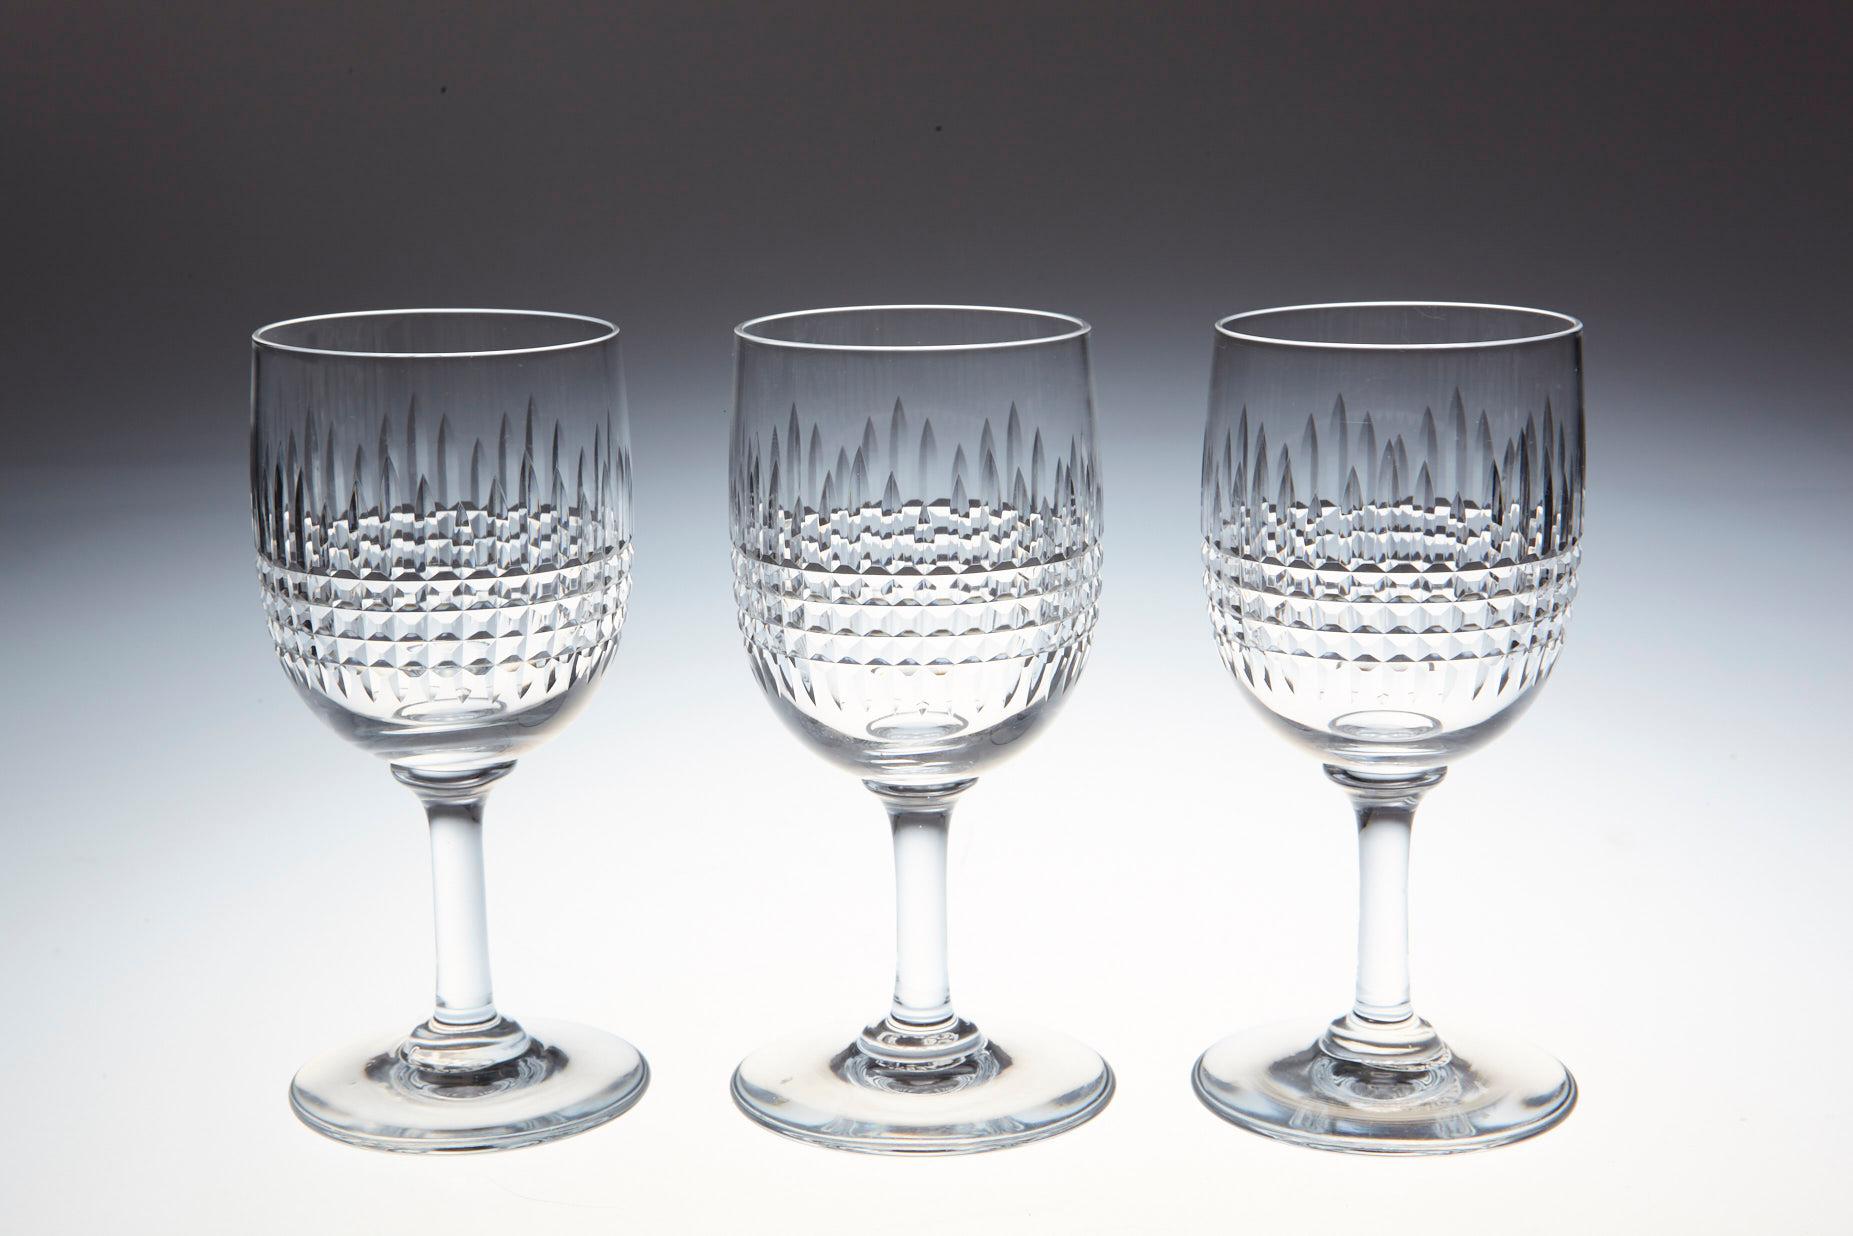 Rare set of 10 Baccarat crystal sherry glasses in the 'Nancy' pattern.
This classical shape with finely banded vertical and horizontal cuttings is one of Baccarat Crystal,'s most popular patterns, first created in 1909 but is discontinued